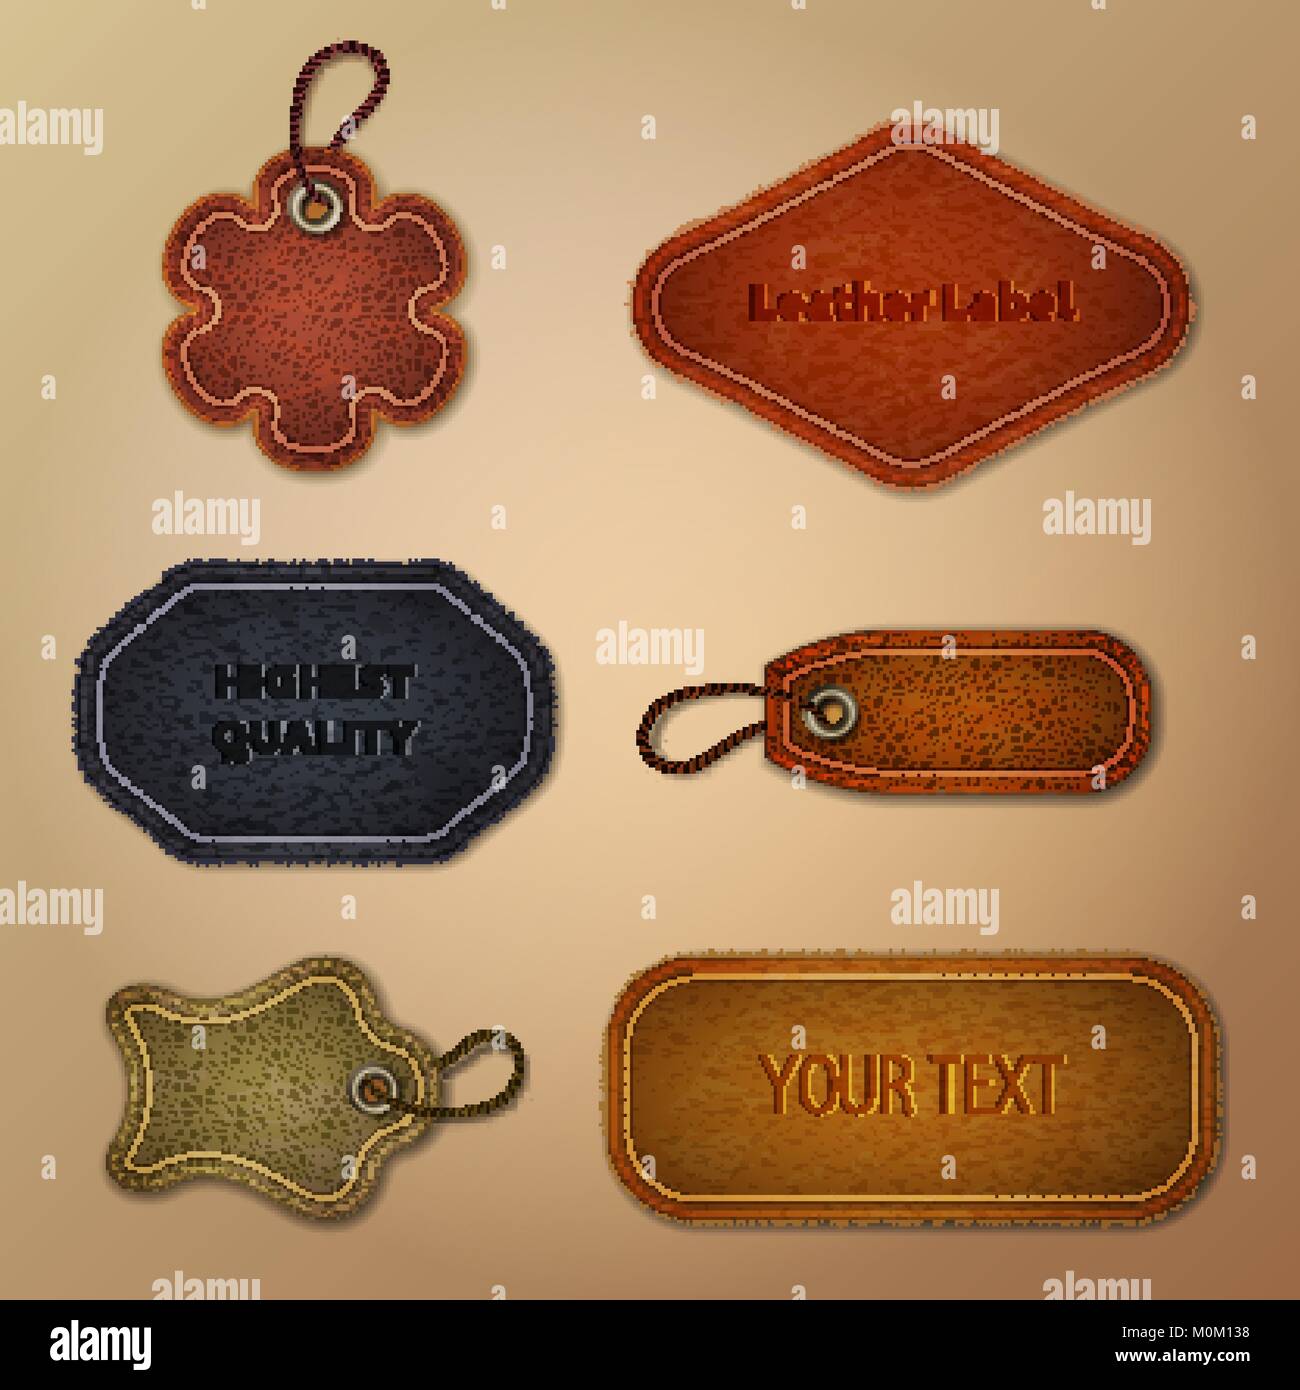 Leather set collection. Tags and labels, vector image Stock Vector